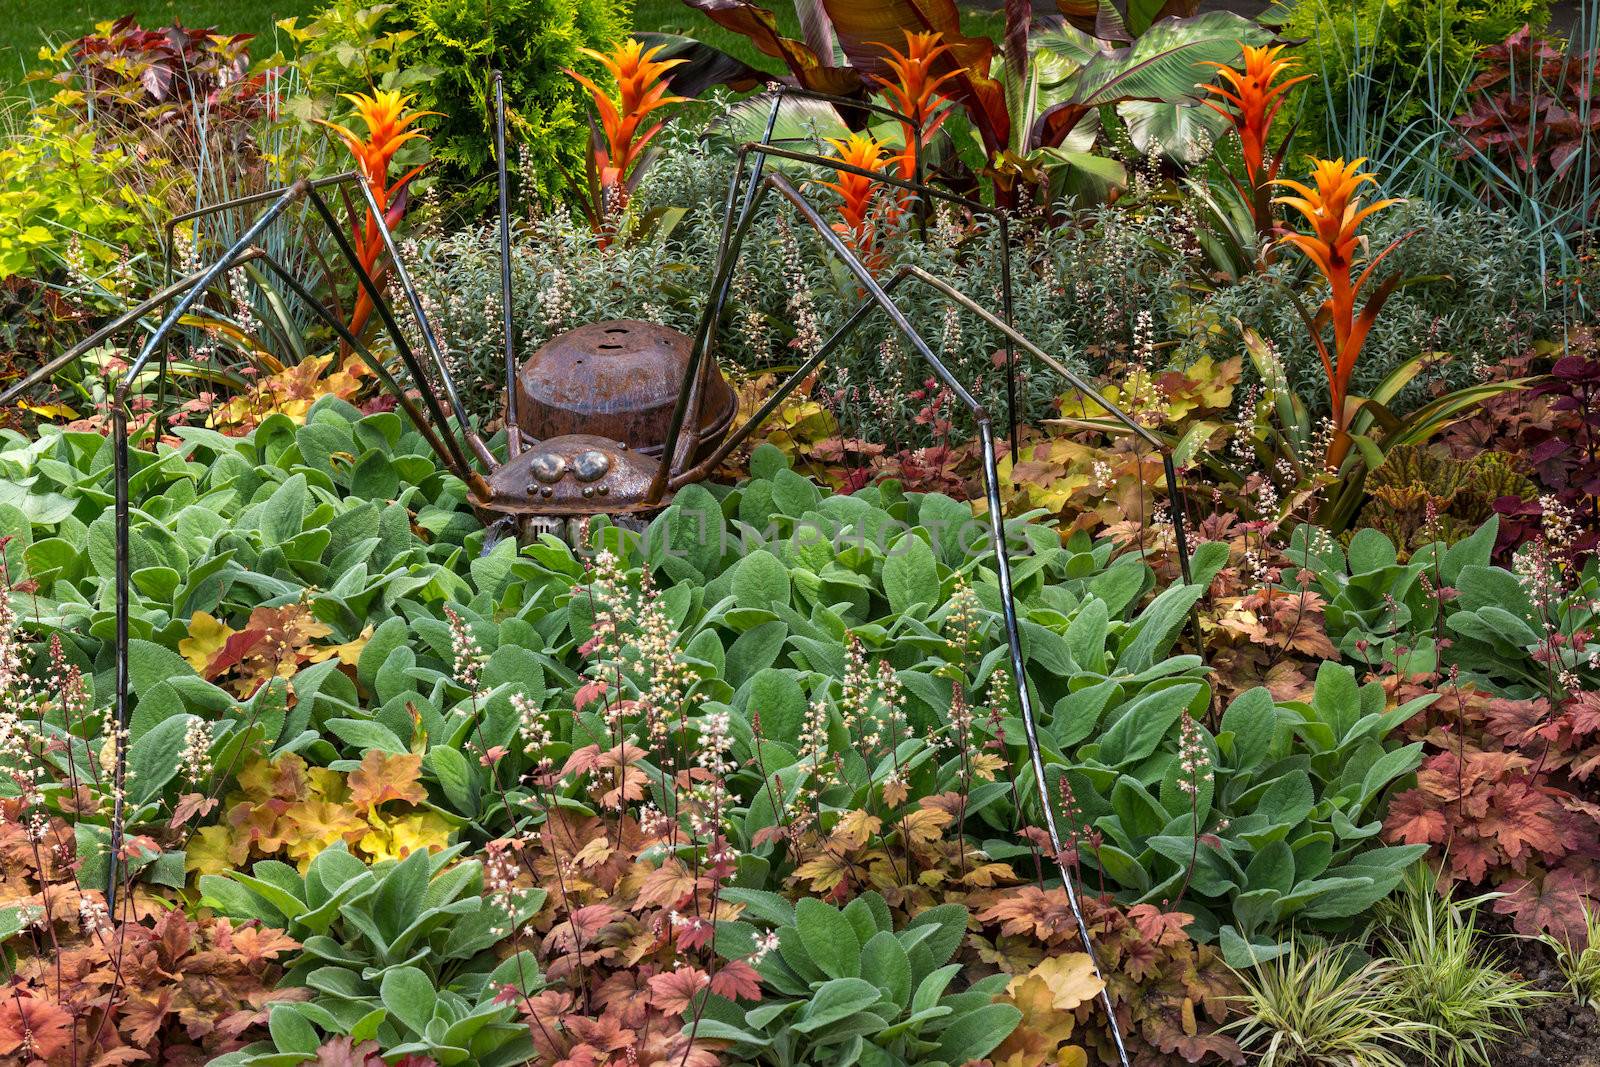 Rusty metal spider decorating a garden with colorful variety of plants.